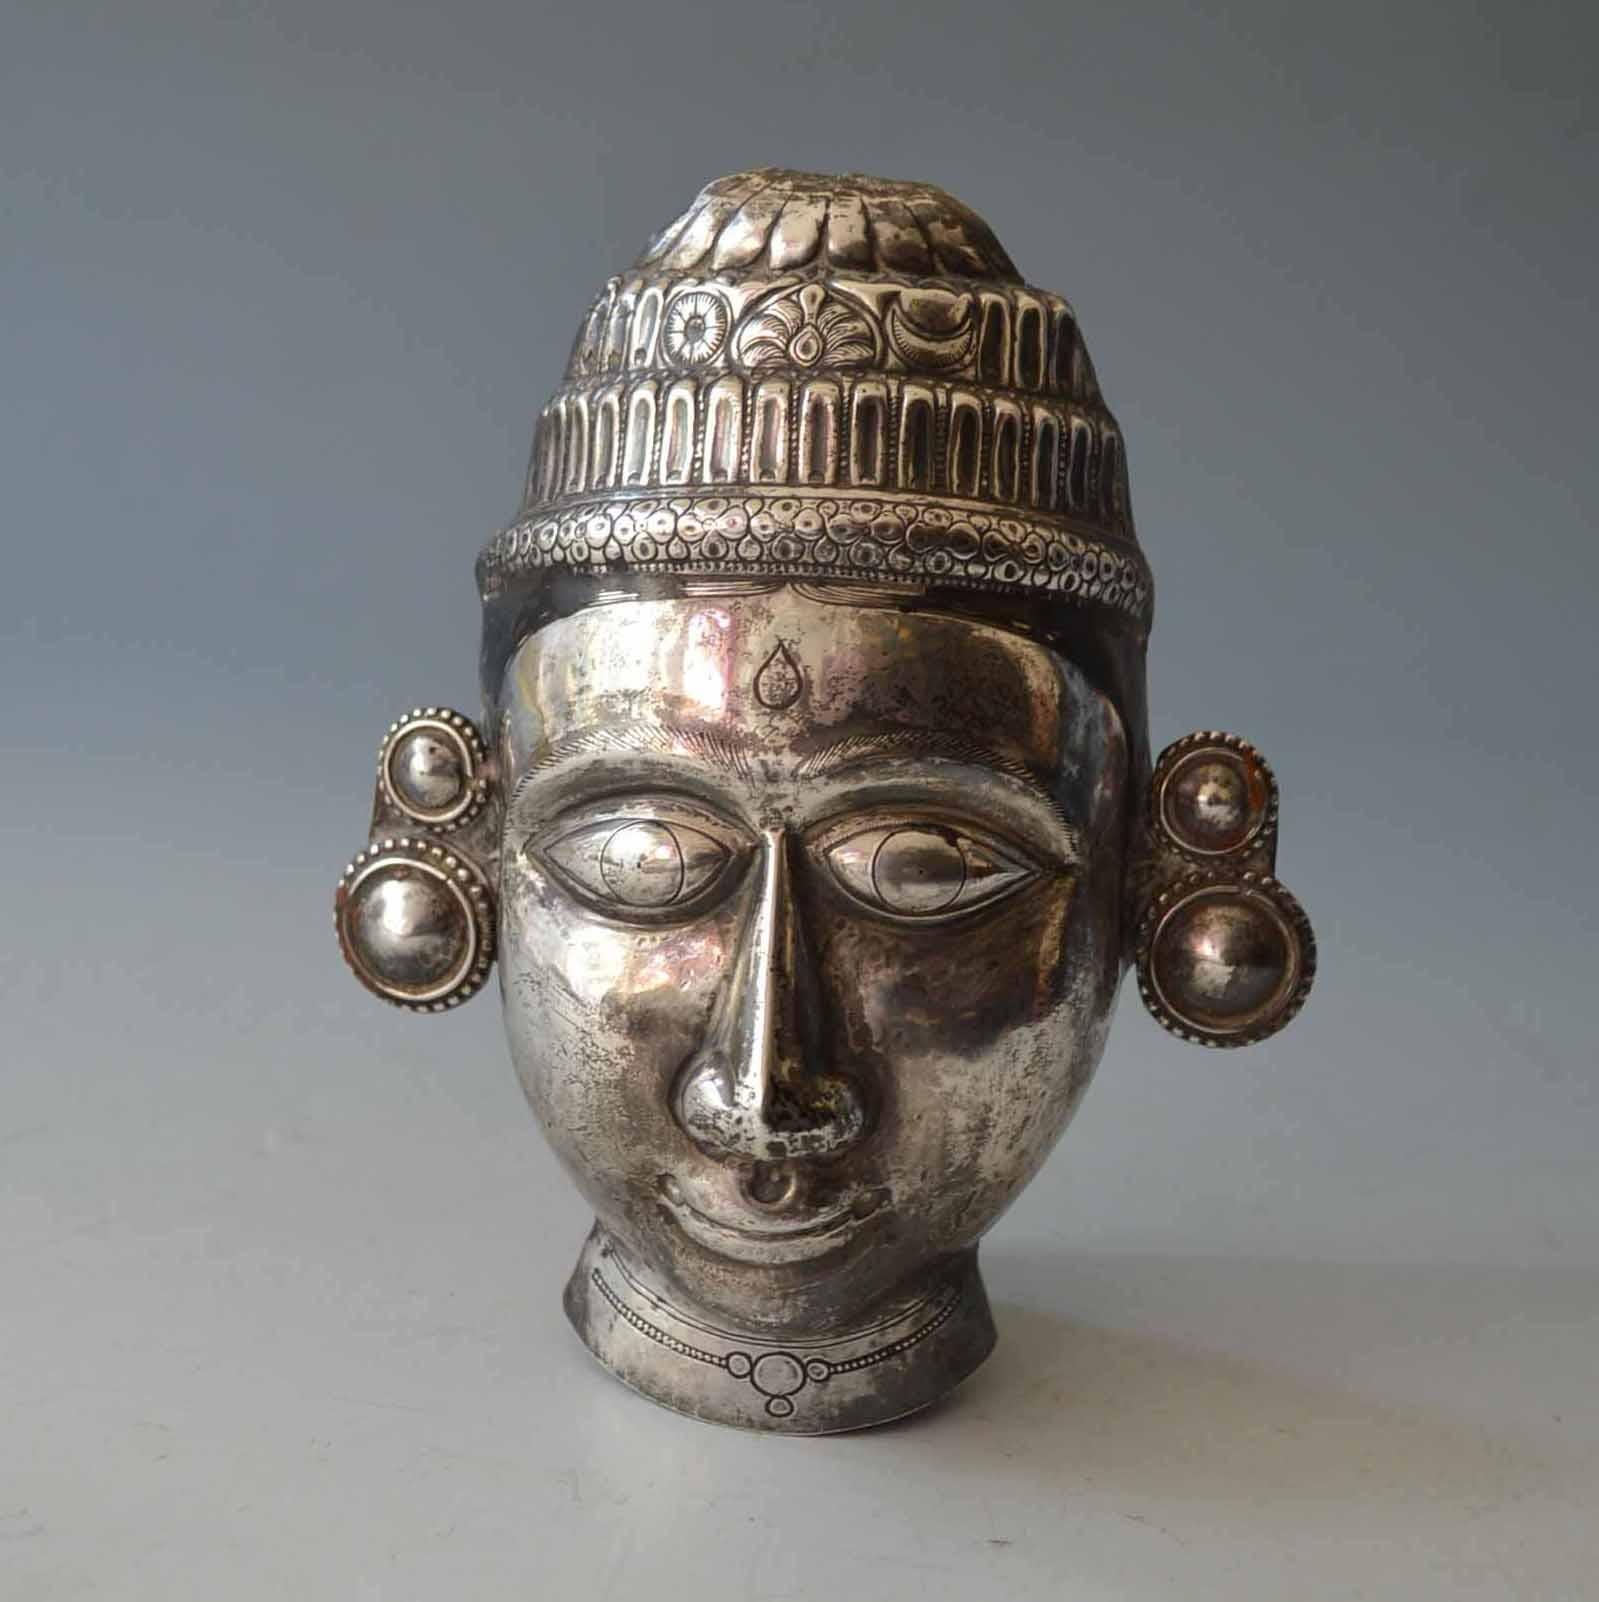 Fine South Indian Repousse Hindu god silver mask. 
Hand crafted repousse mask of a Hindu God probably with enamel Hair detail. 
The mask would have been made to used as a devotional object in the home or temple.
Weight 203 grams solid High